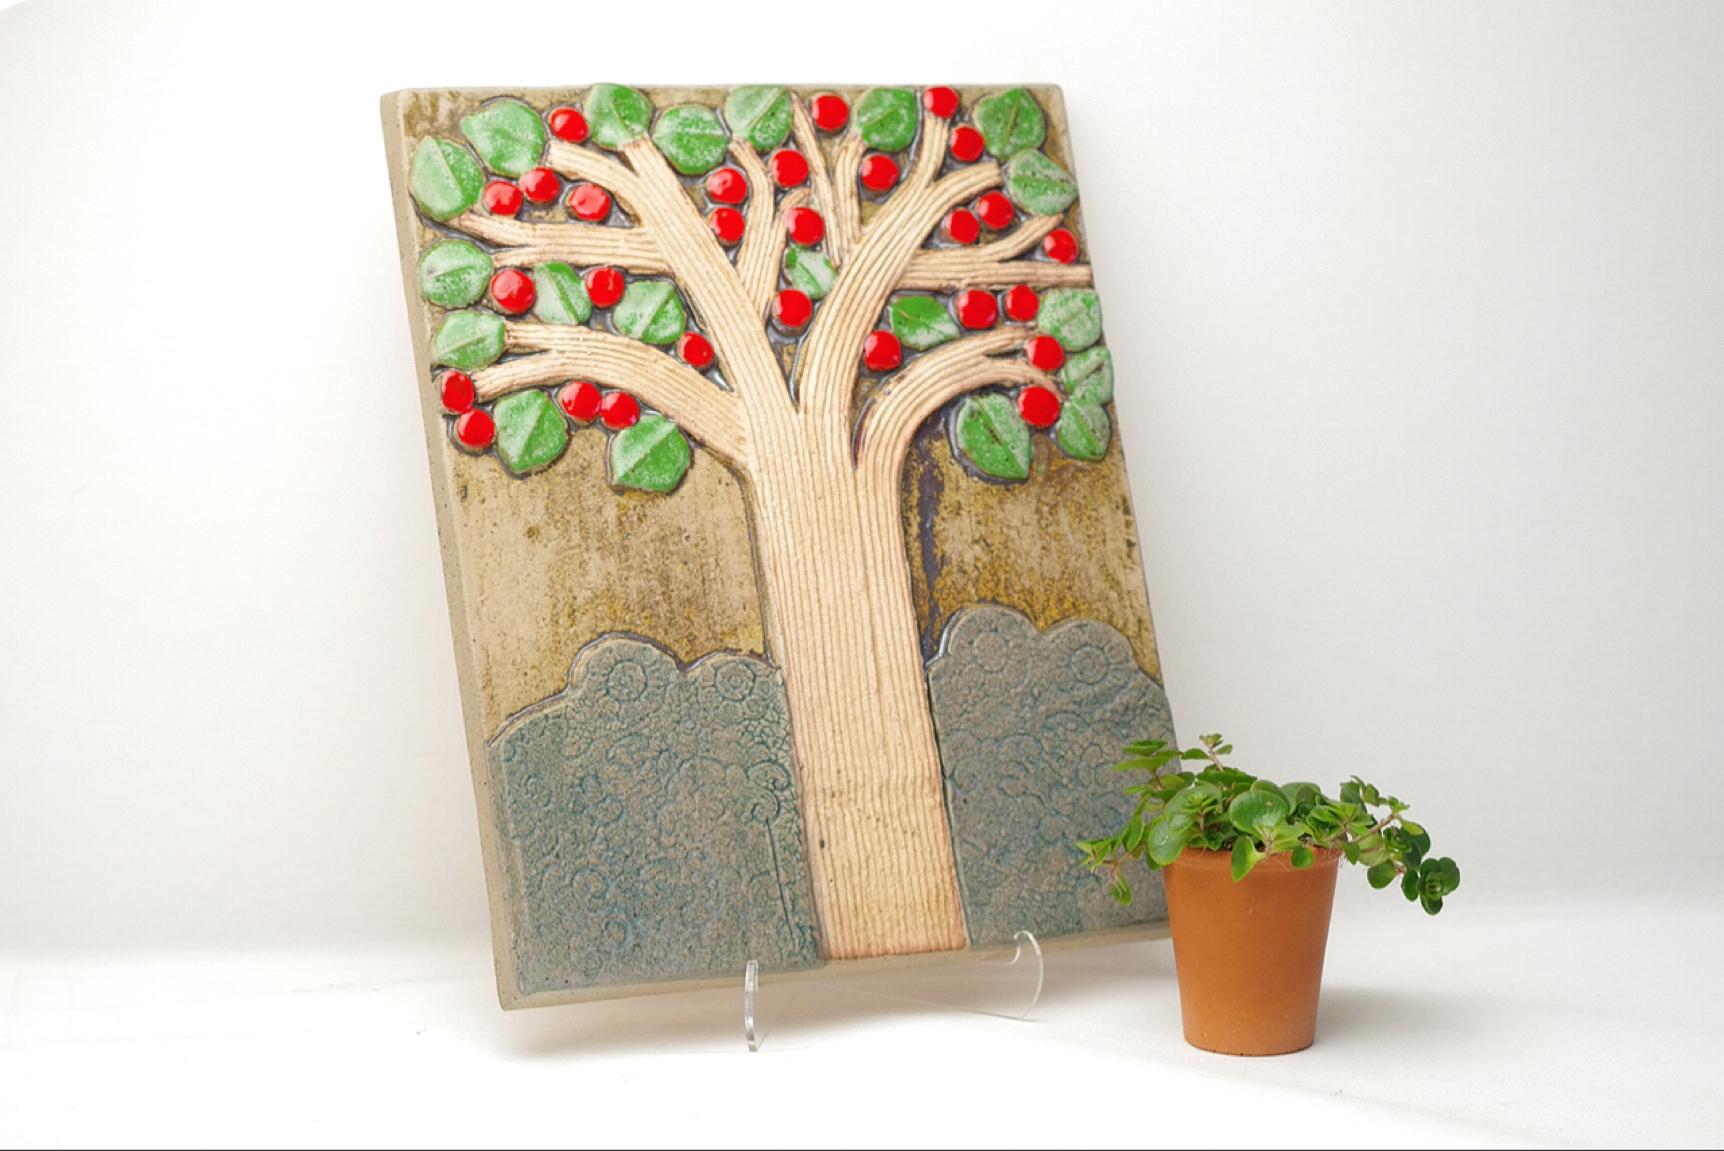 Product Description:
This tile of an apple tree by Lisa Larson is very rare. There exists a more common version of this tile which has a man and woman sitting in front of the tree, this tile however does not have the couple on it. Although the